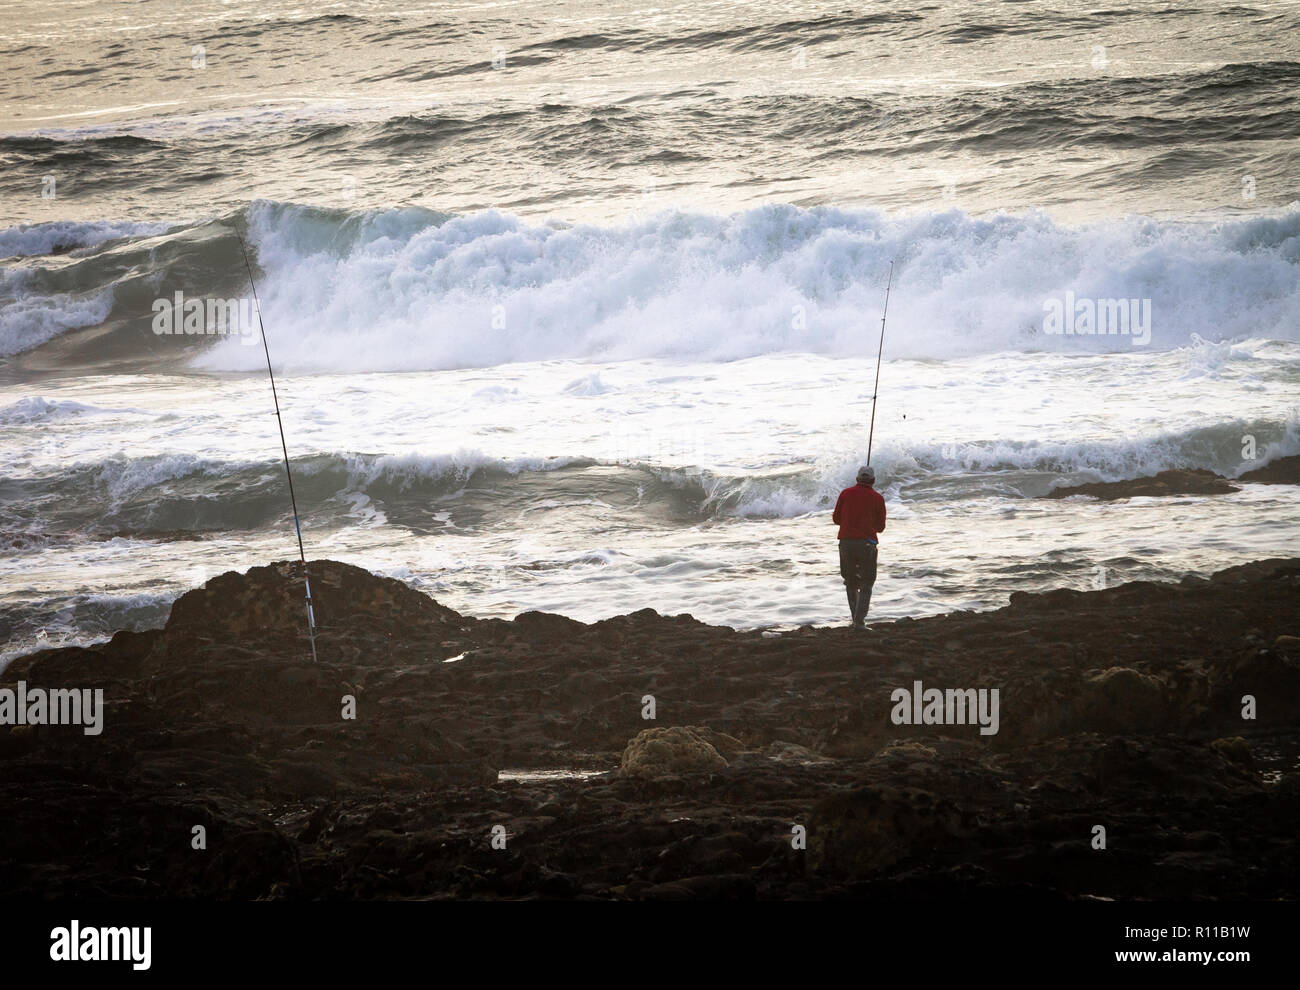 A fisherman and his fishing poles at the rocky shore, near the ocean. Waves, back view. Stock Photo